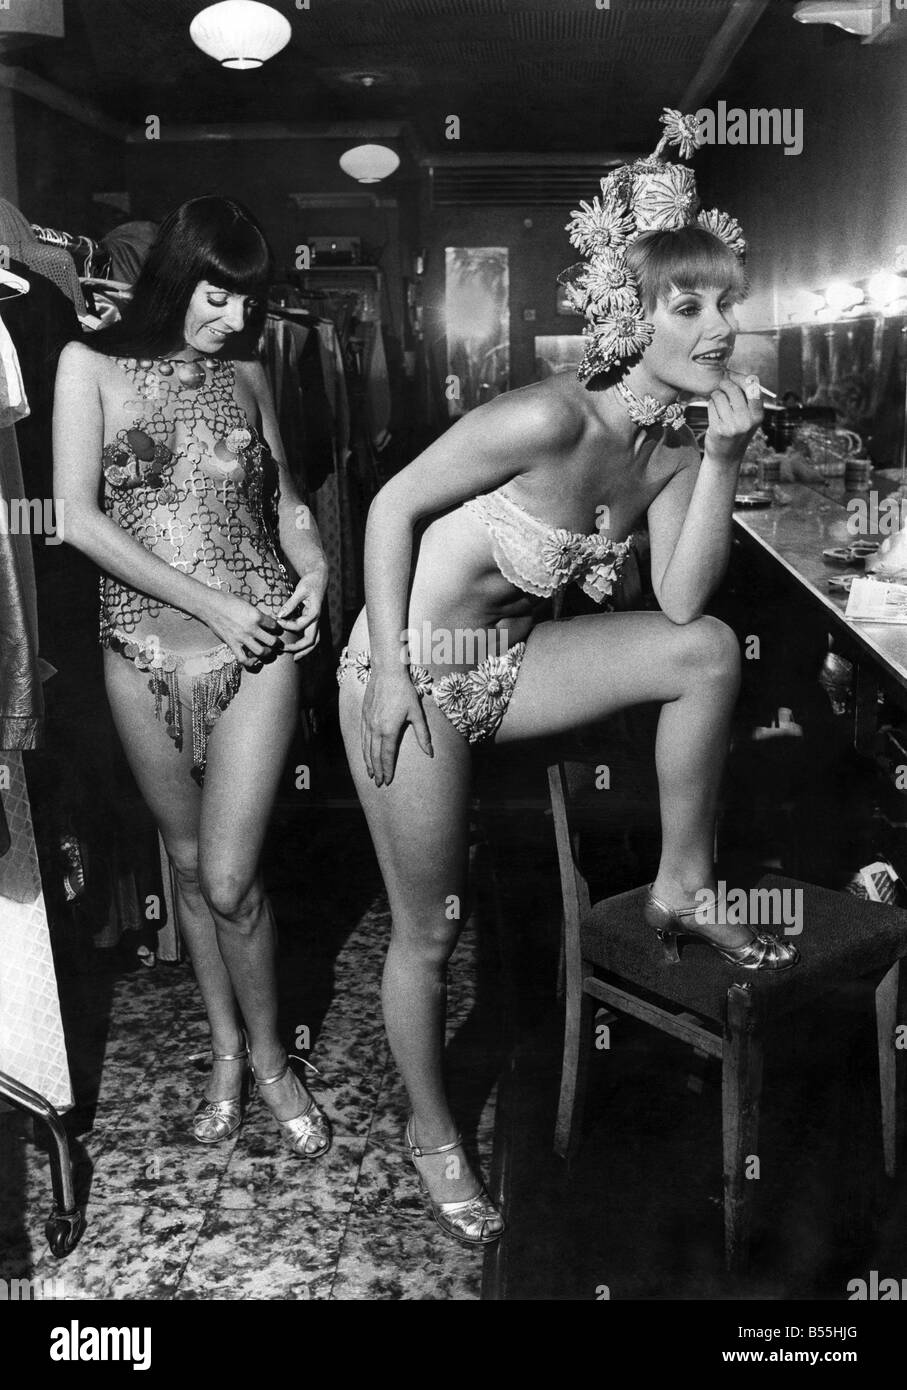 Two cabaret girls put theor make up on before going on stage. August 1975 P012715 Stock Photo